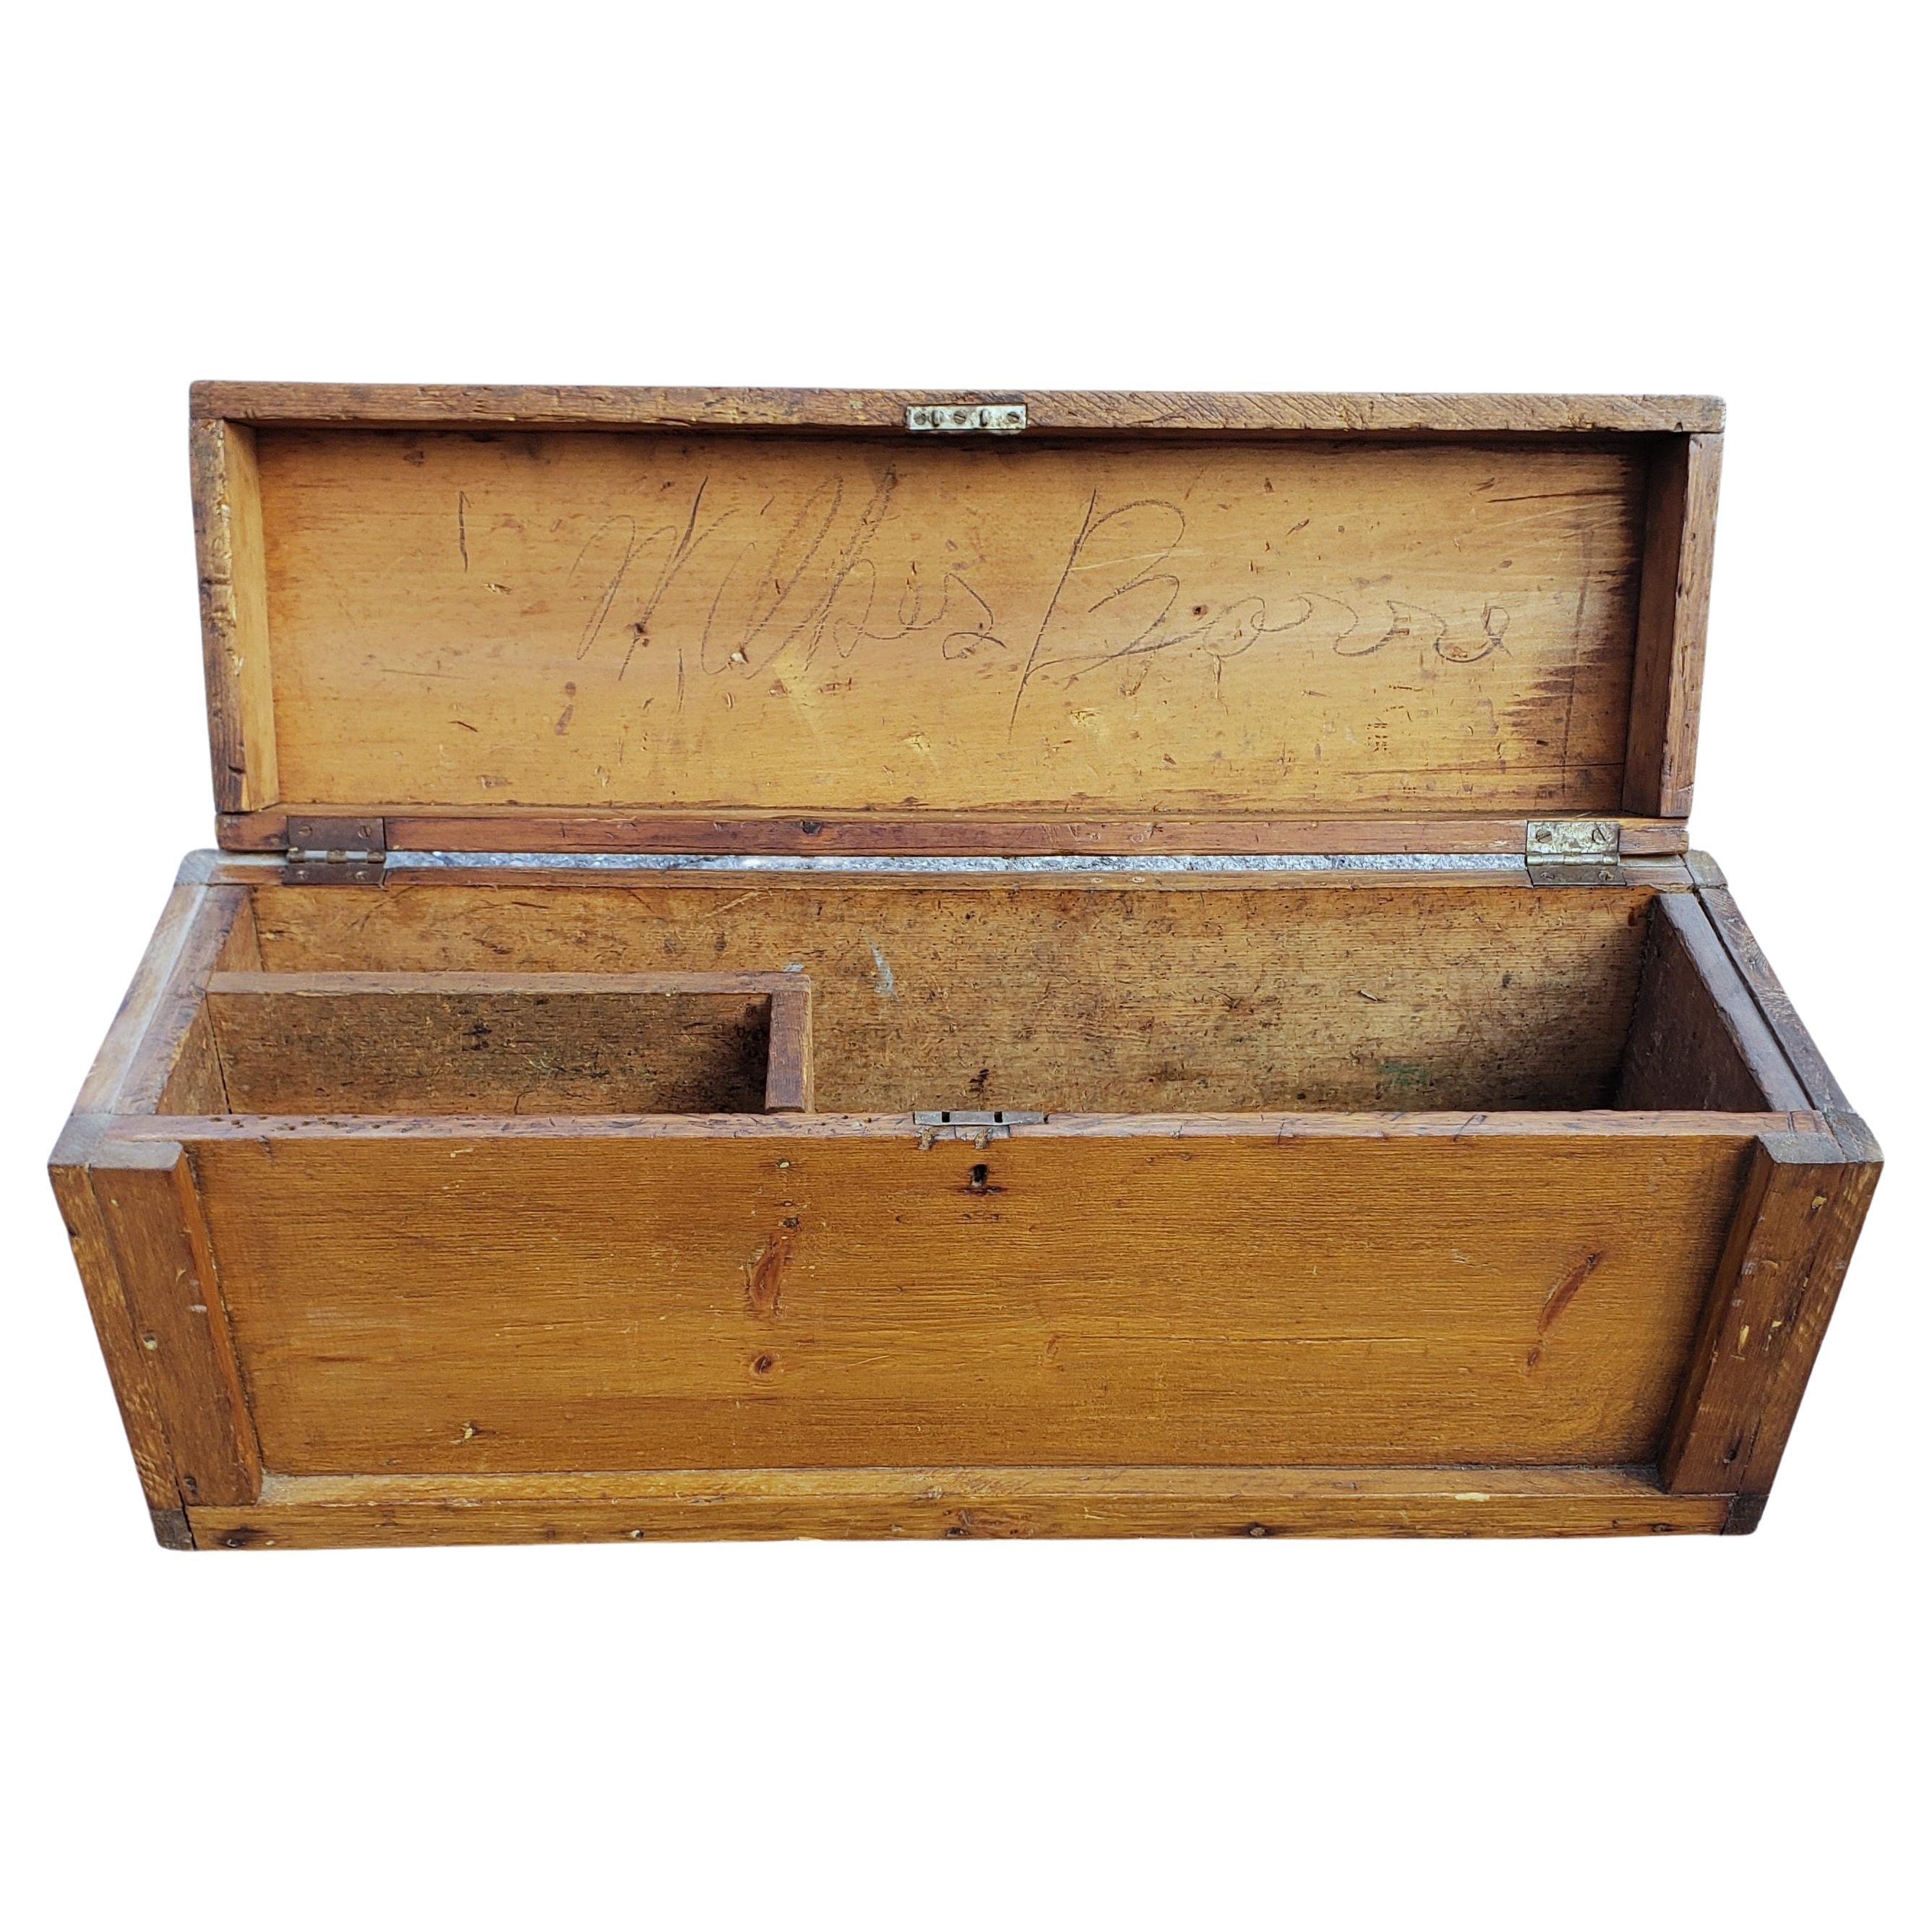 Early 20th Century American Primitive Wooden Tool Box